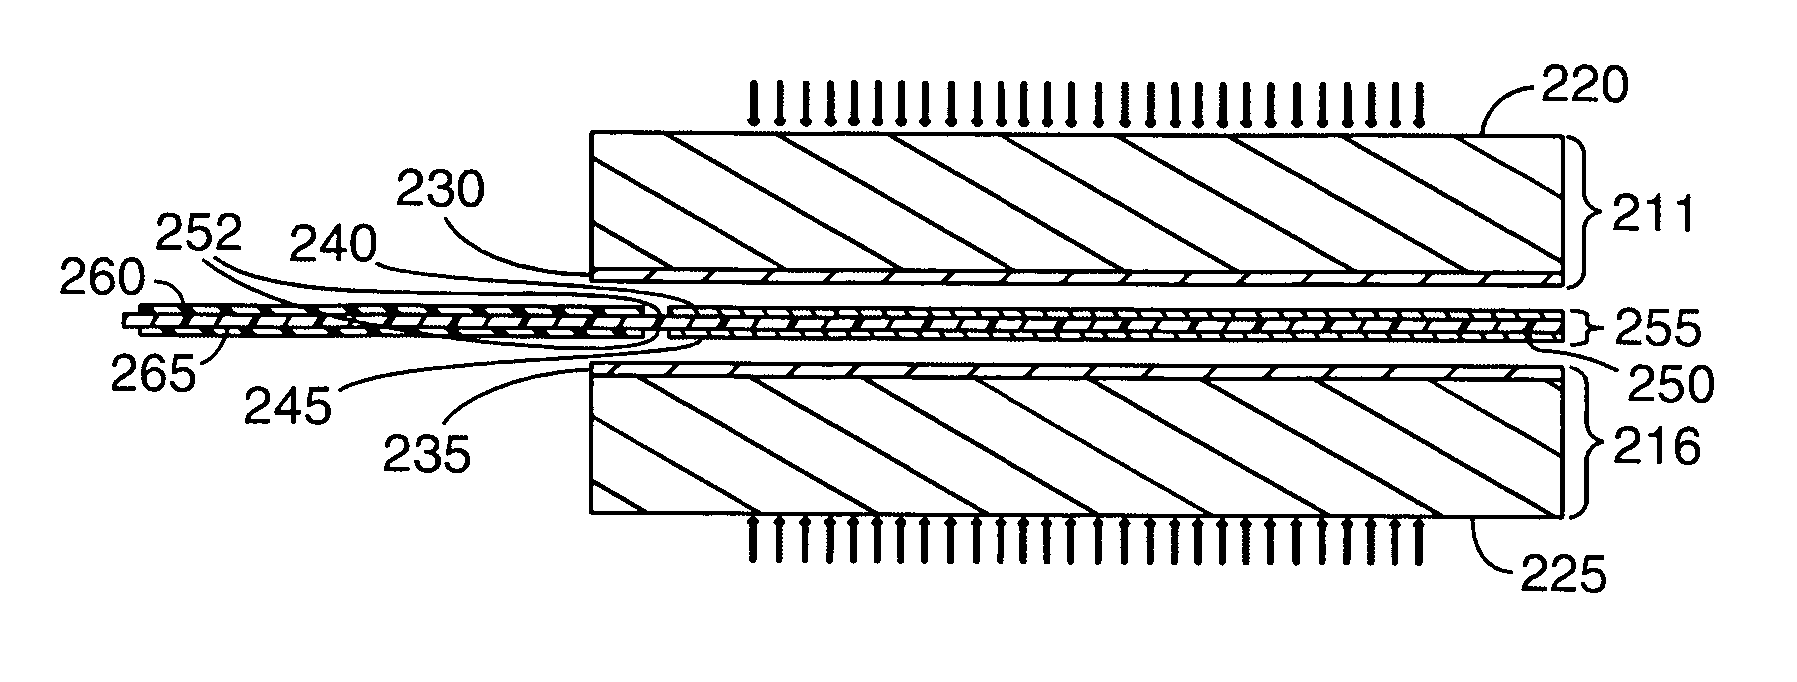 Curable subgasket for a membrane electrode assembly